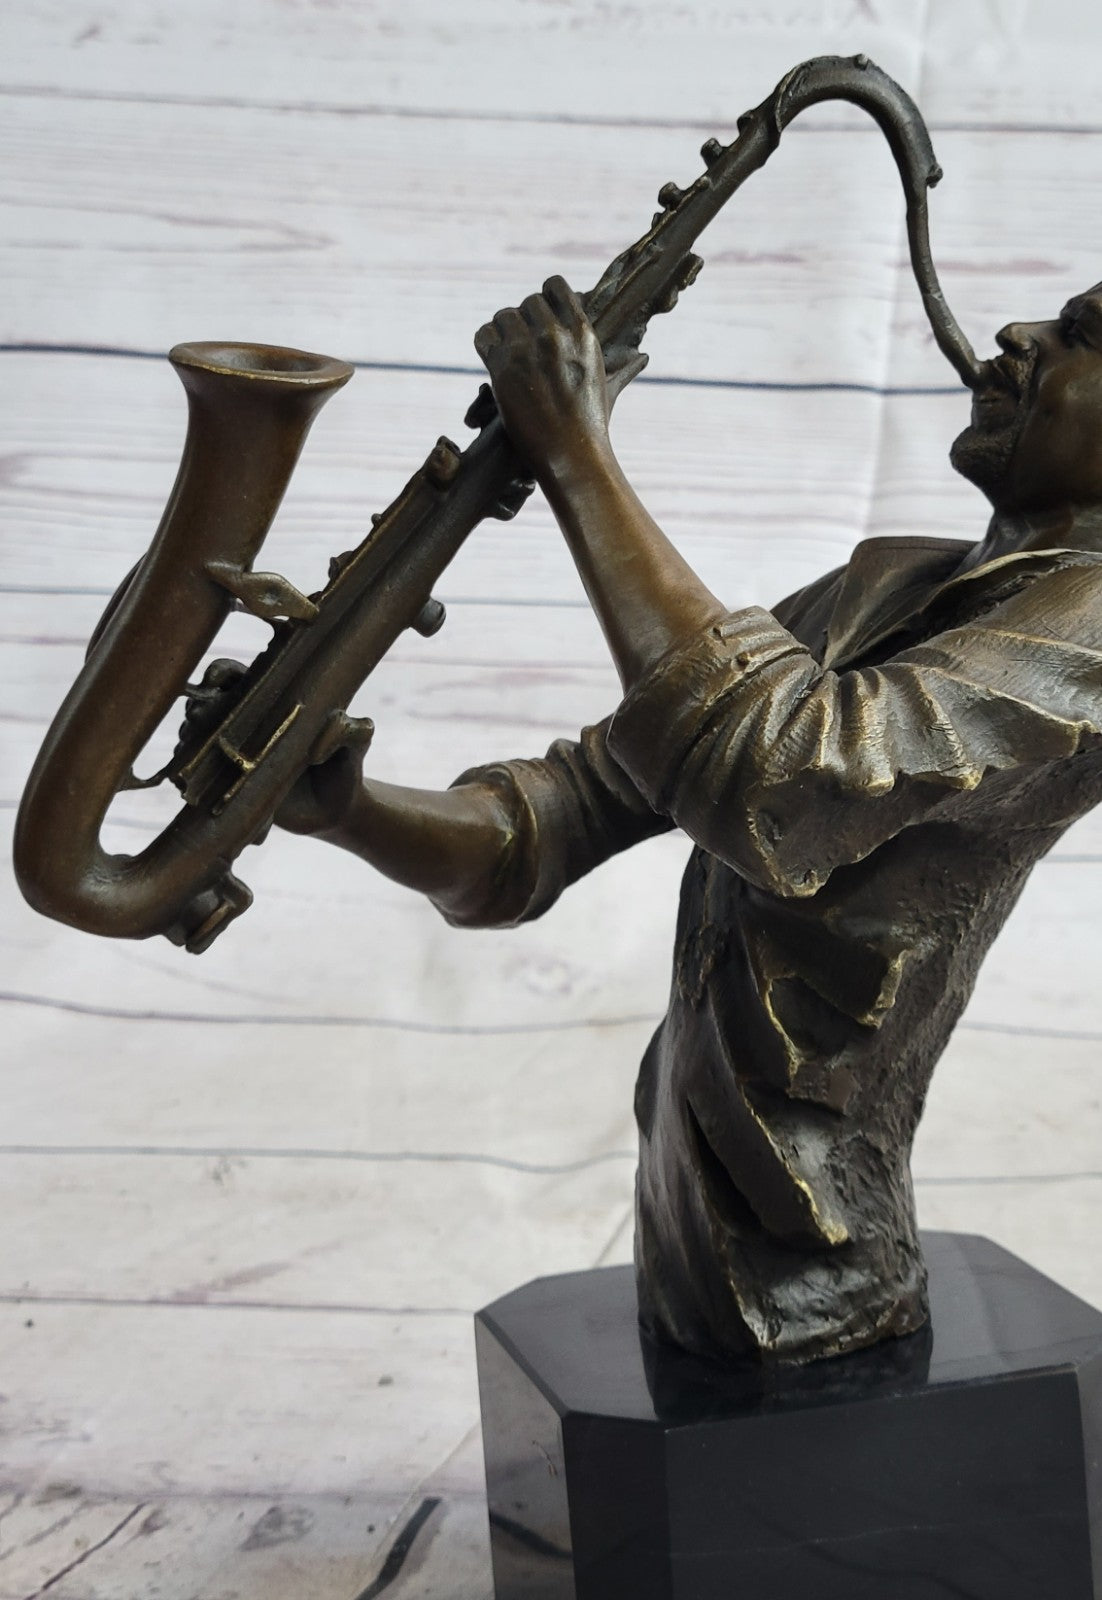 TRUMPET PLAYER Bronze Statuette JAZZ BAND Collection, 10", European Finery